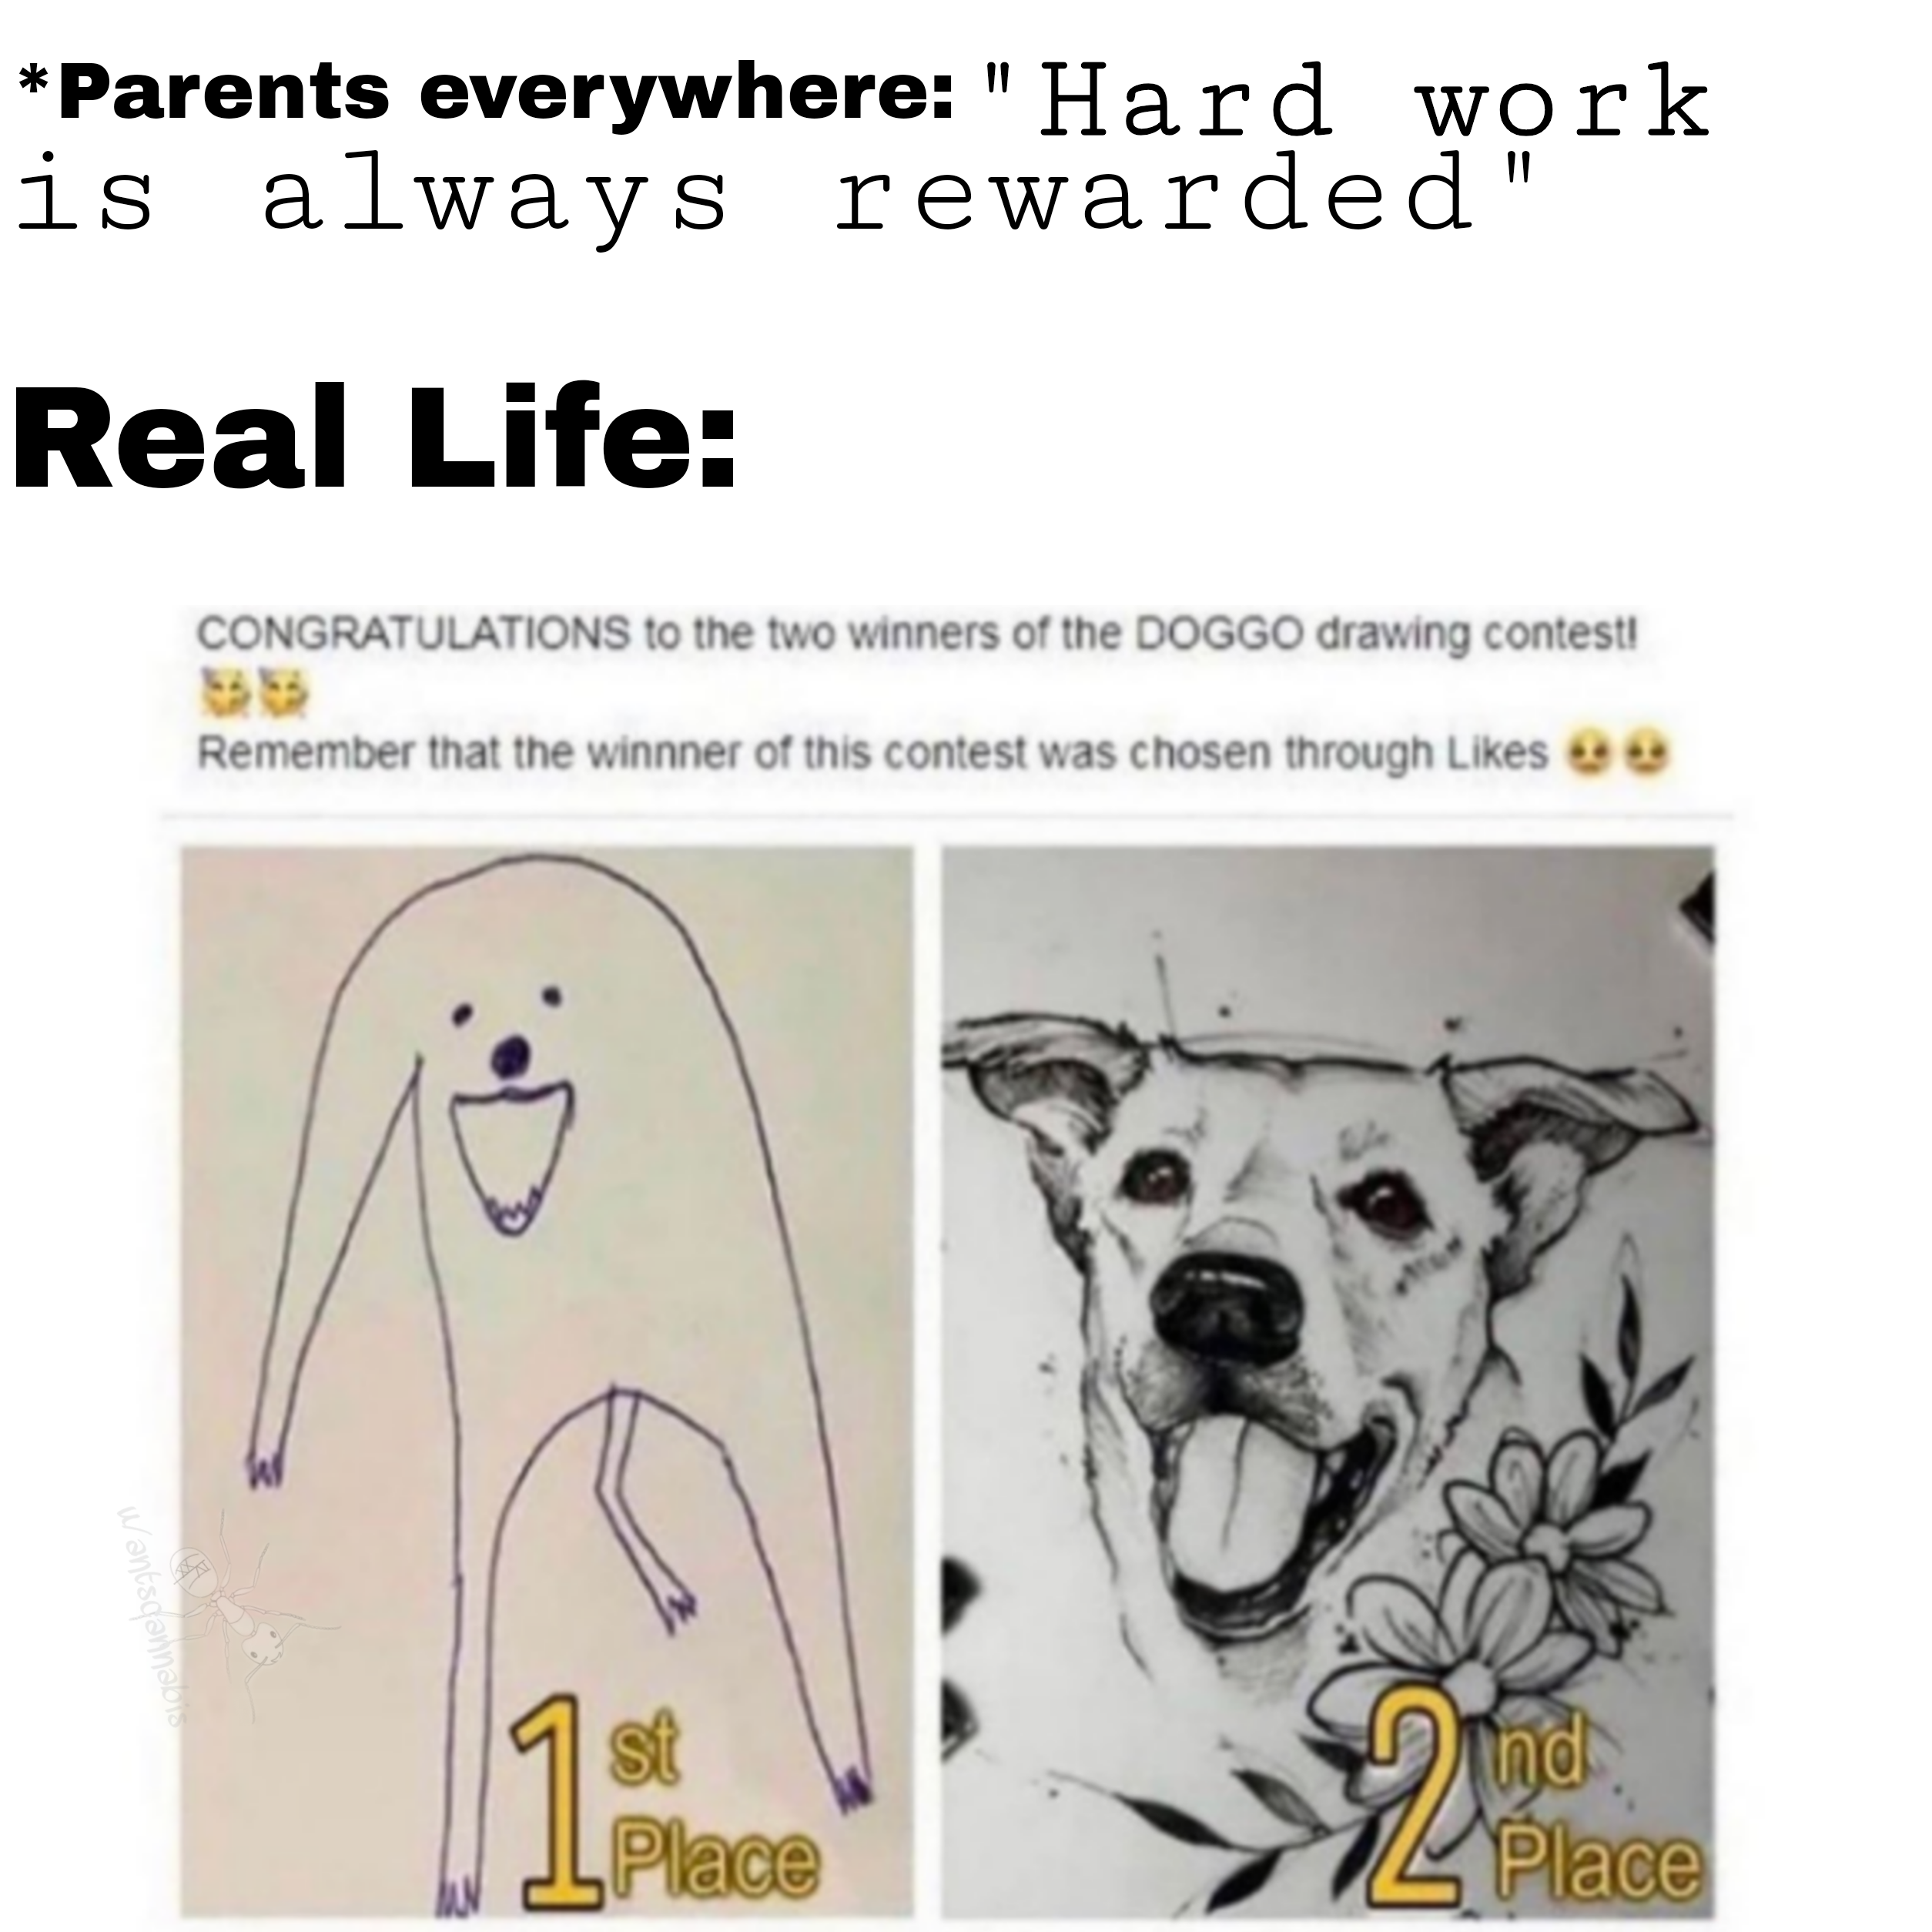 congratulations to the two winners of the doggo drawing contest - Parents everywhere"Hard work is always rewarded" Real Life Congratulations to the two winners of the Doggo drawing contest! Remember that the winner of this contest was chosen through 0 0 s